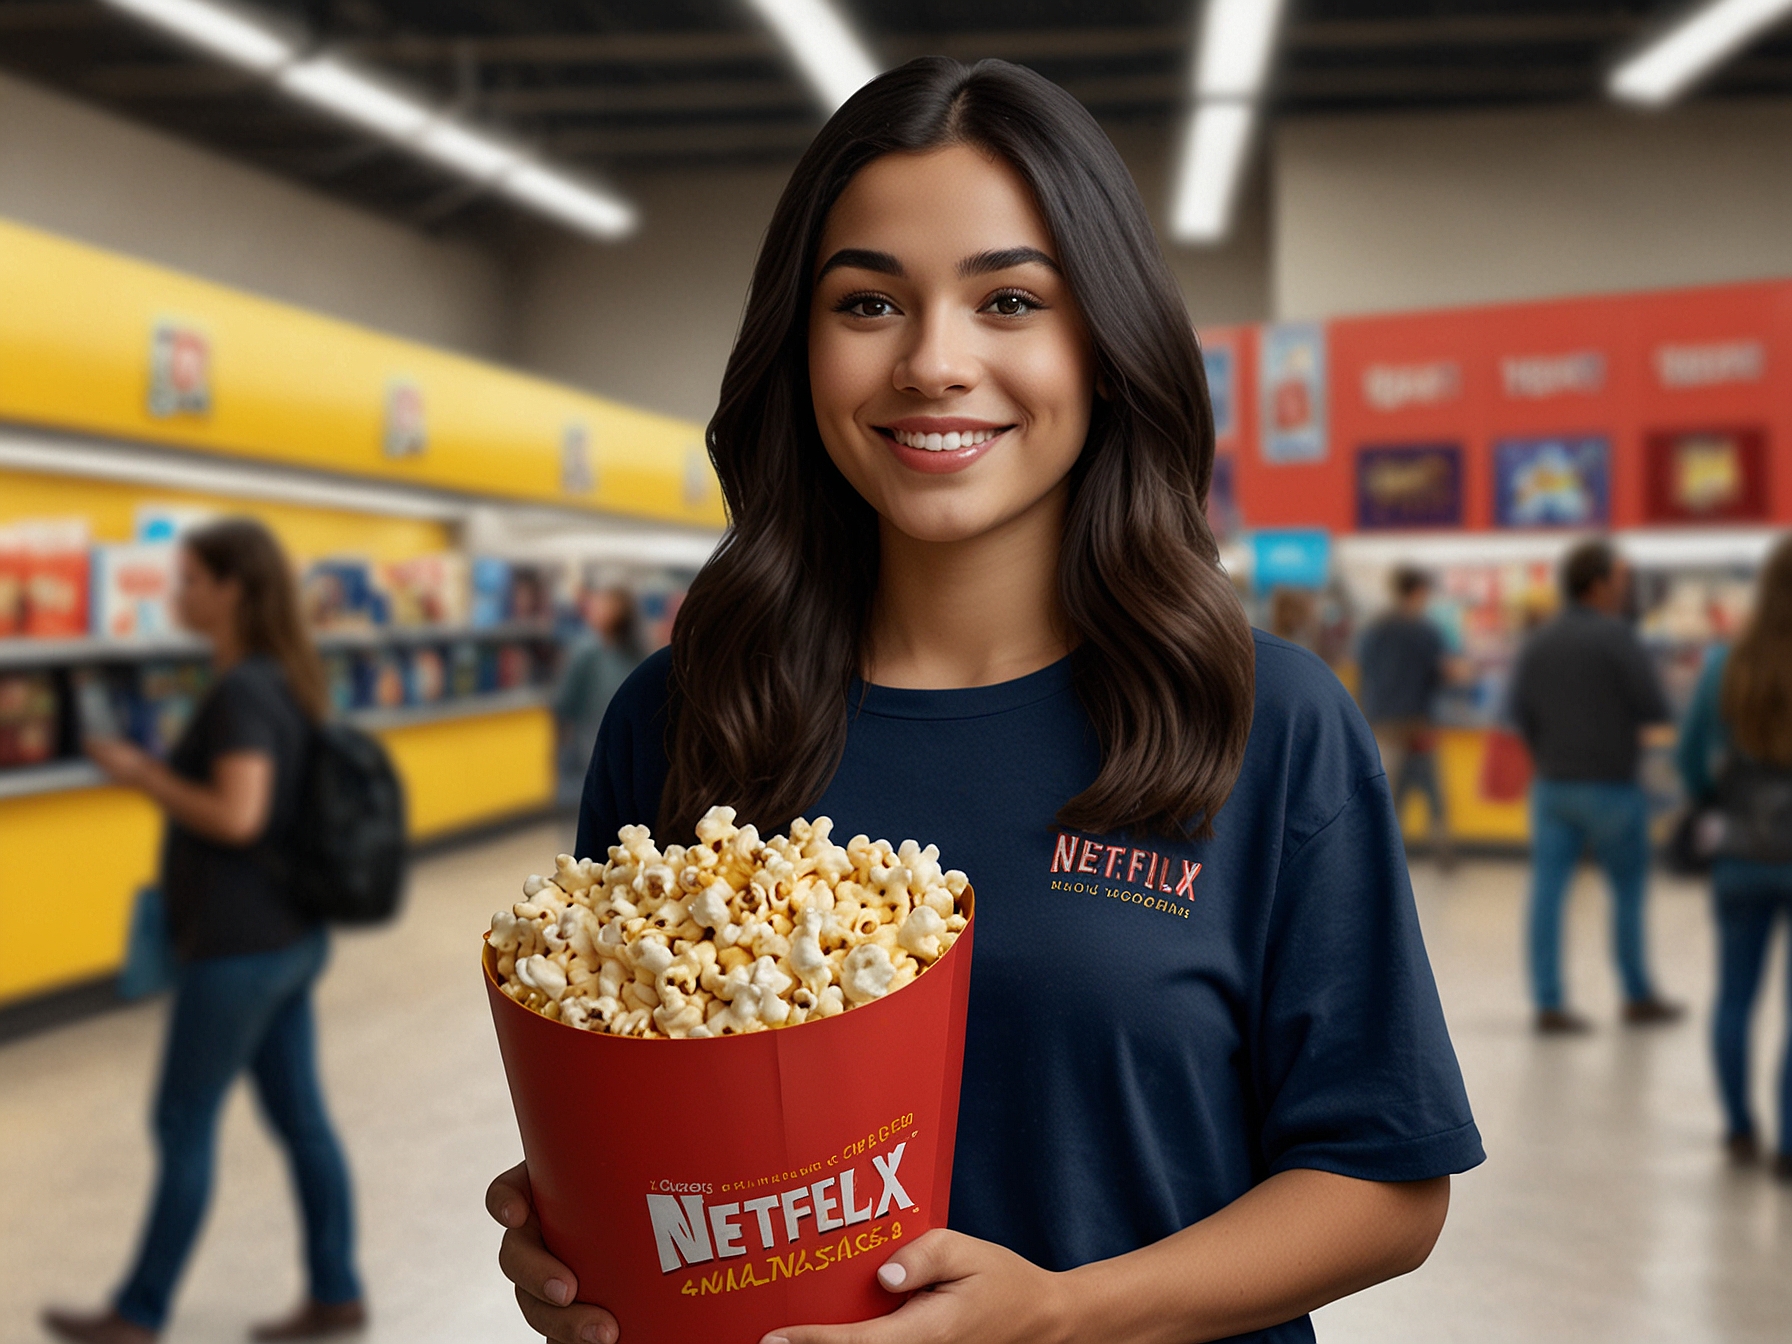 A shopper holding a bag of Netflix-branded popcorn at Walmart, showcasing the partnership with Popcorn Indiana and emphasizing the product's accessibility for home entertainment.